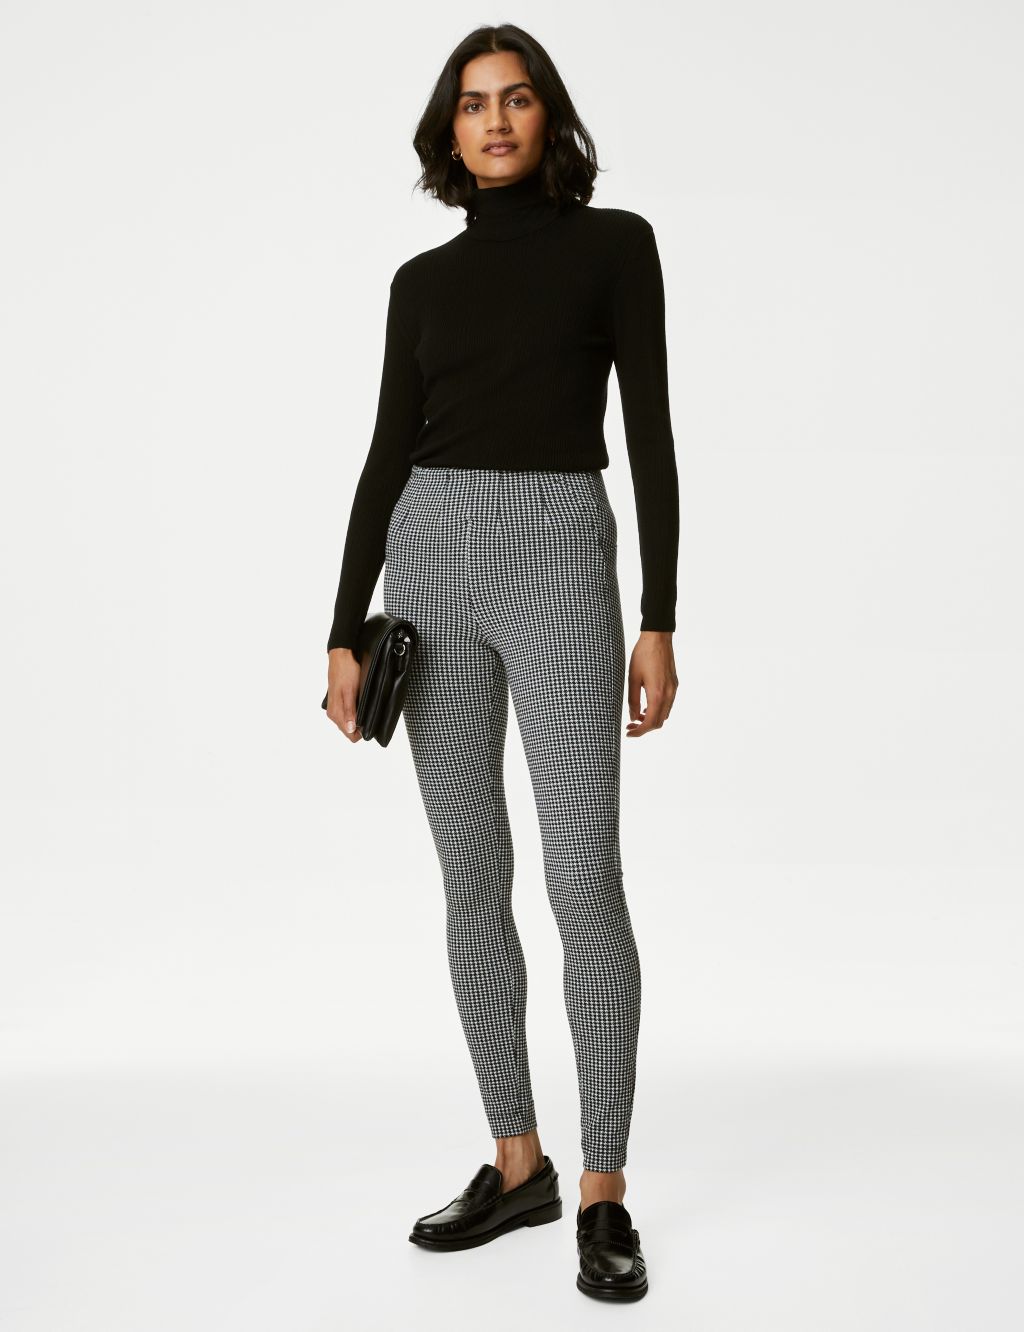 Marks and Spencer - Pull on these faux leather leggings for a casual,  modern look. Discover them at M&S and online. ​​ #MarksandSpencerCyprus  #AutumnCollection #anythingbutordinary